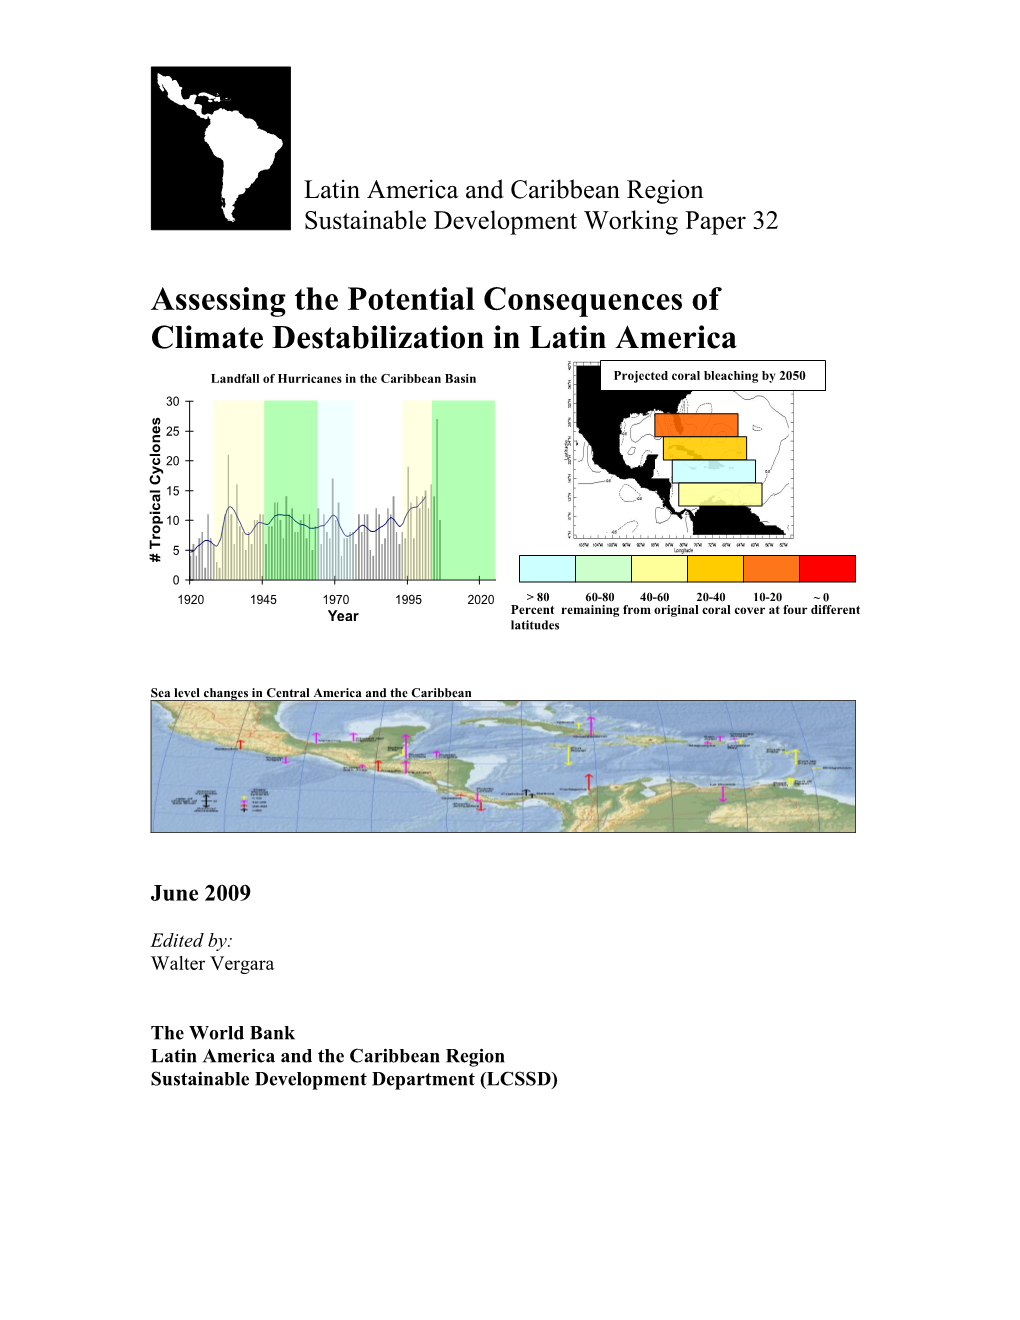 Assessing the Potential Consequences of Climate Destabilization in Latin America